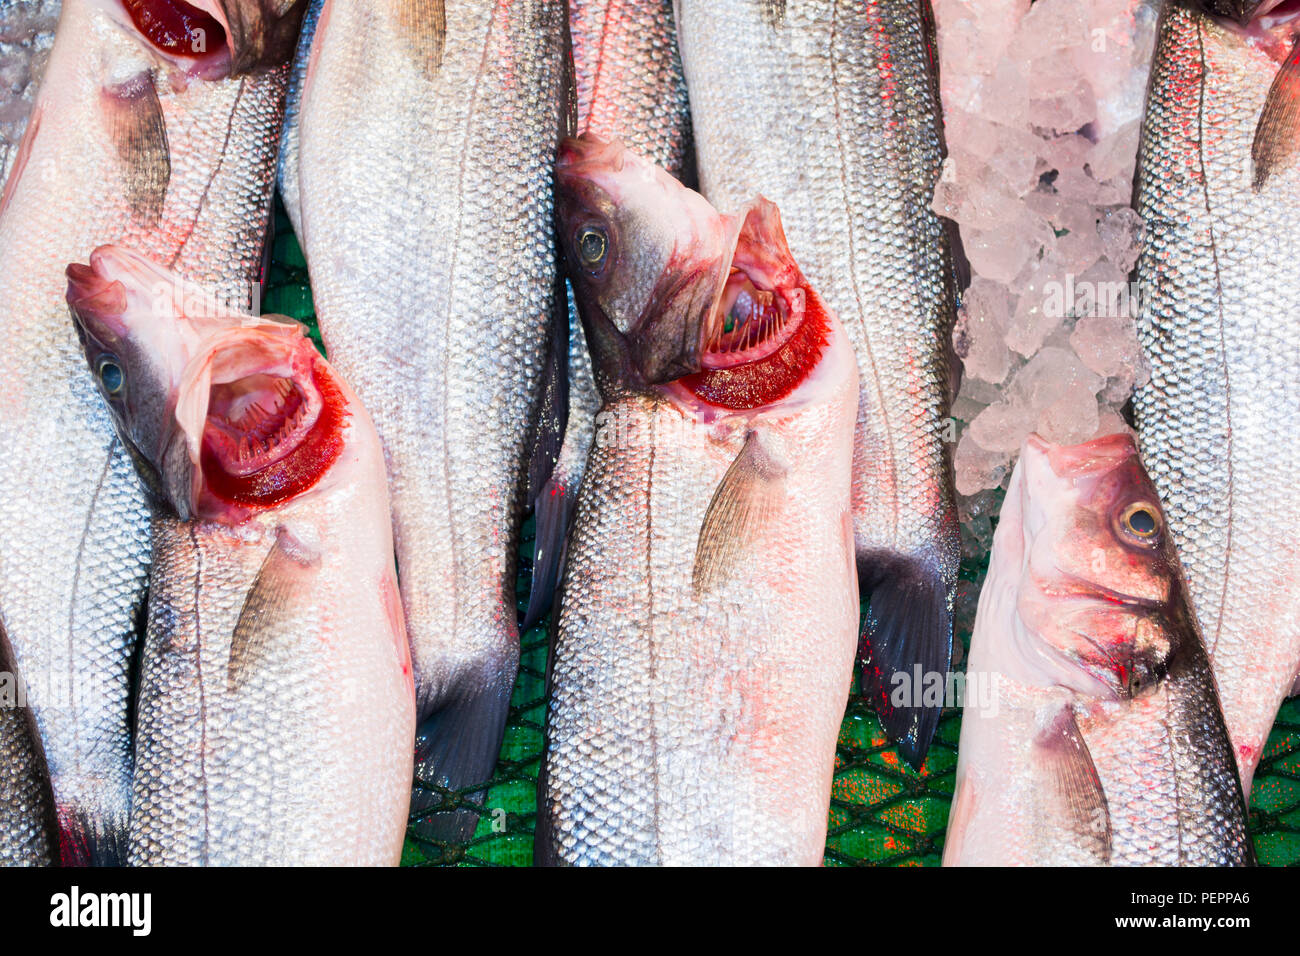 Close up of fresh fishes Giant Perch, barramundi, silver perch, white perch, white snapper or sea basses in cool ice. Fishes of mass product from loca Stock Photo